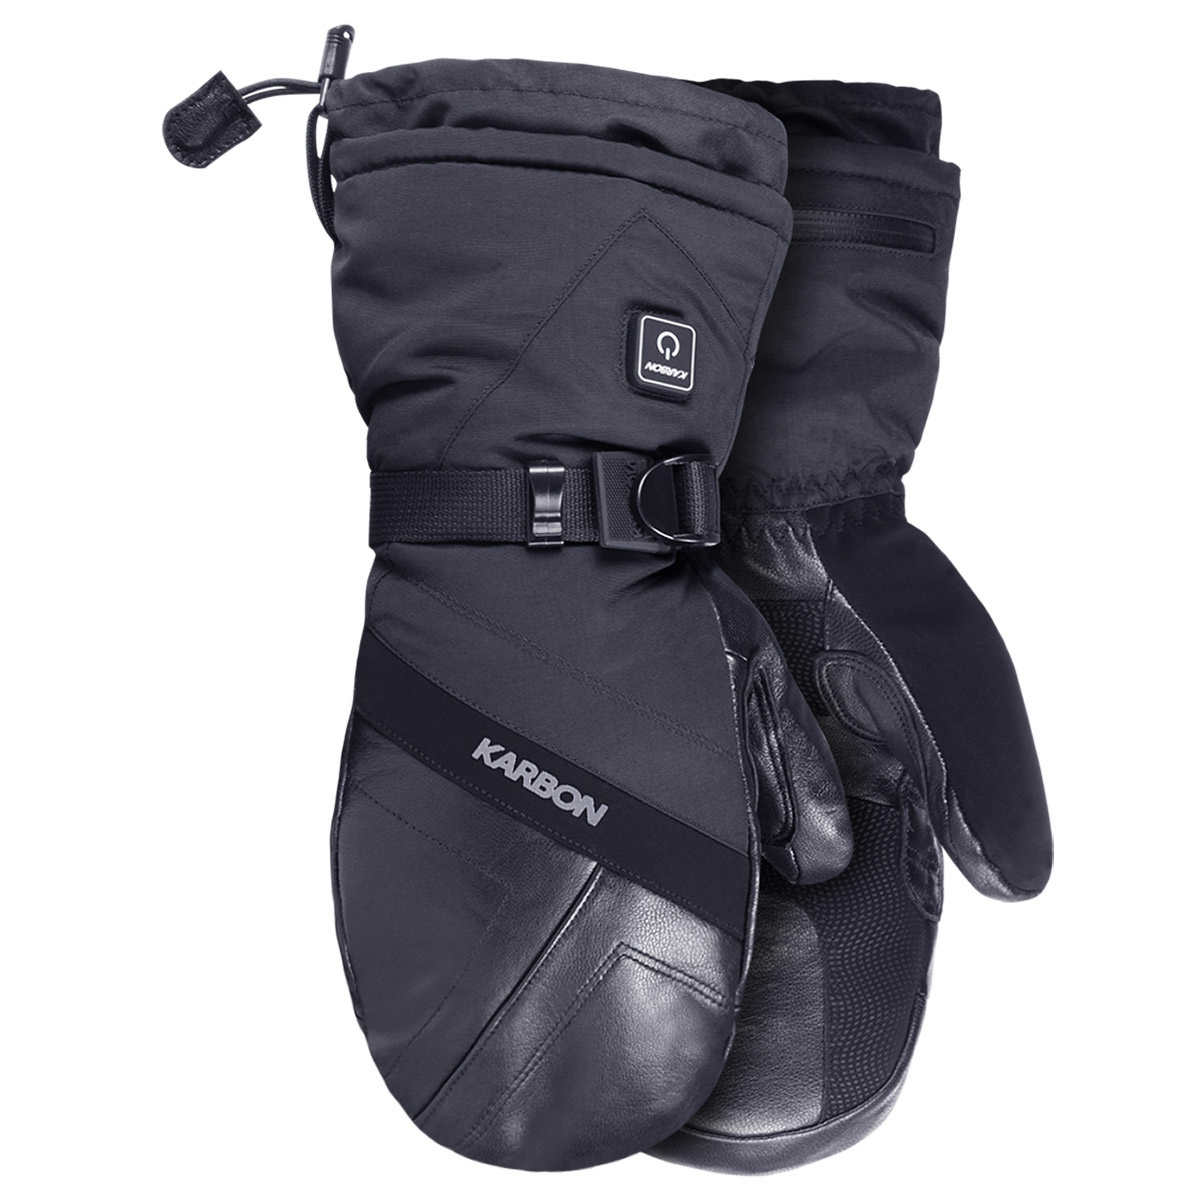 Karbon Heated Ski Mittens for Women with Lithium- Polymer Battery